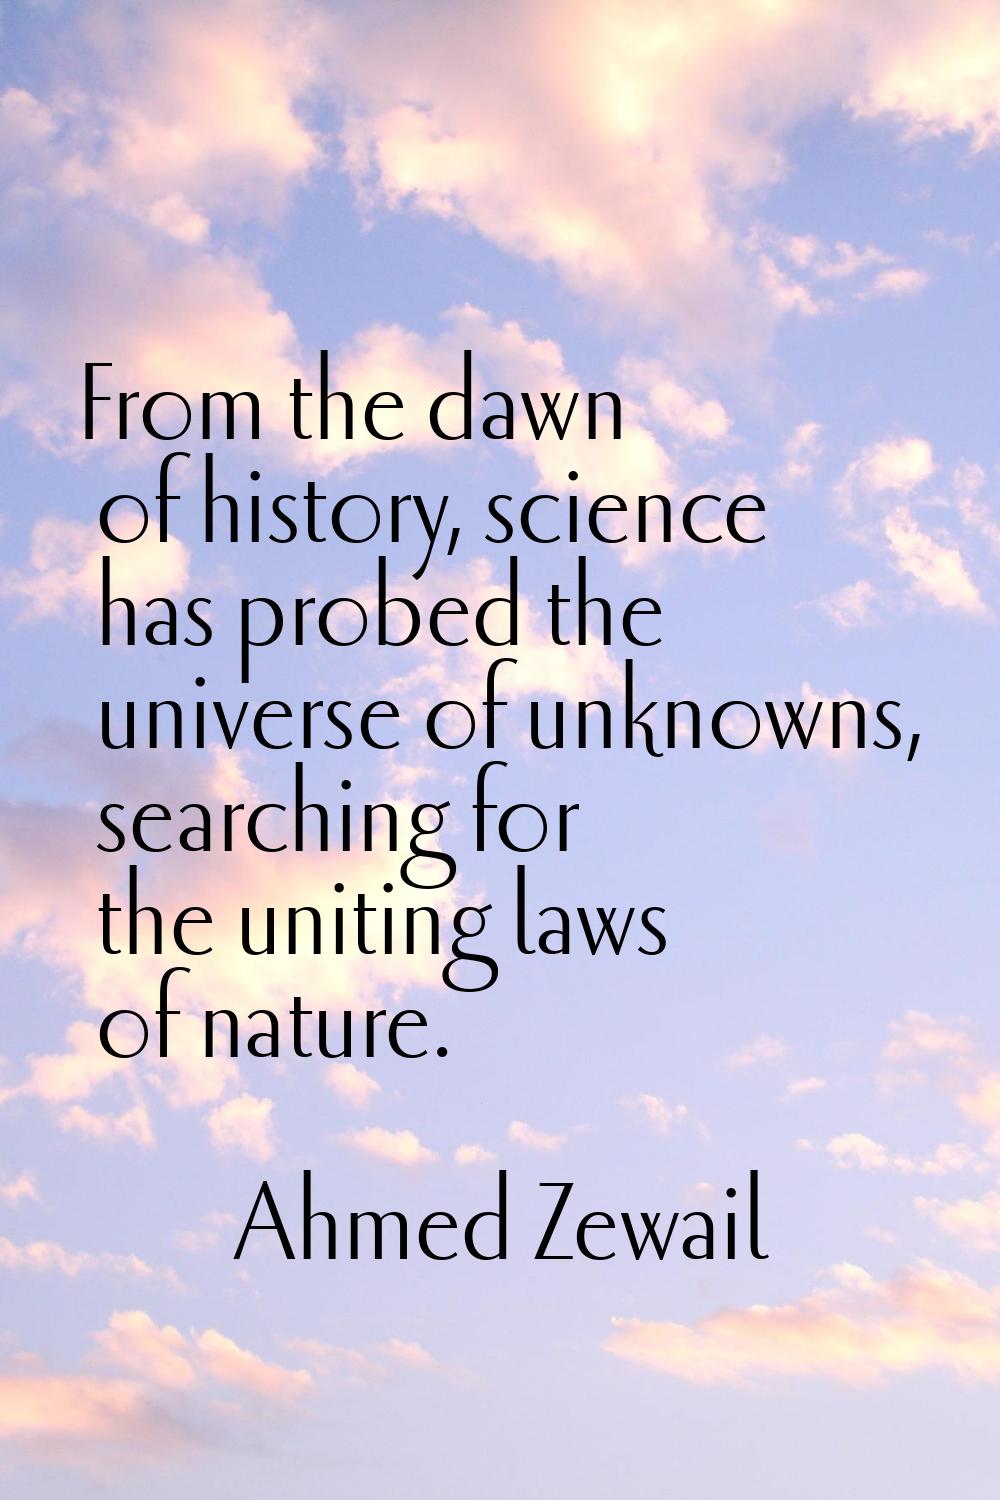 From the dawn of history, science has probed the universe of unknowns, searching for the uniting la